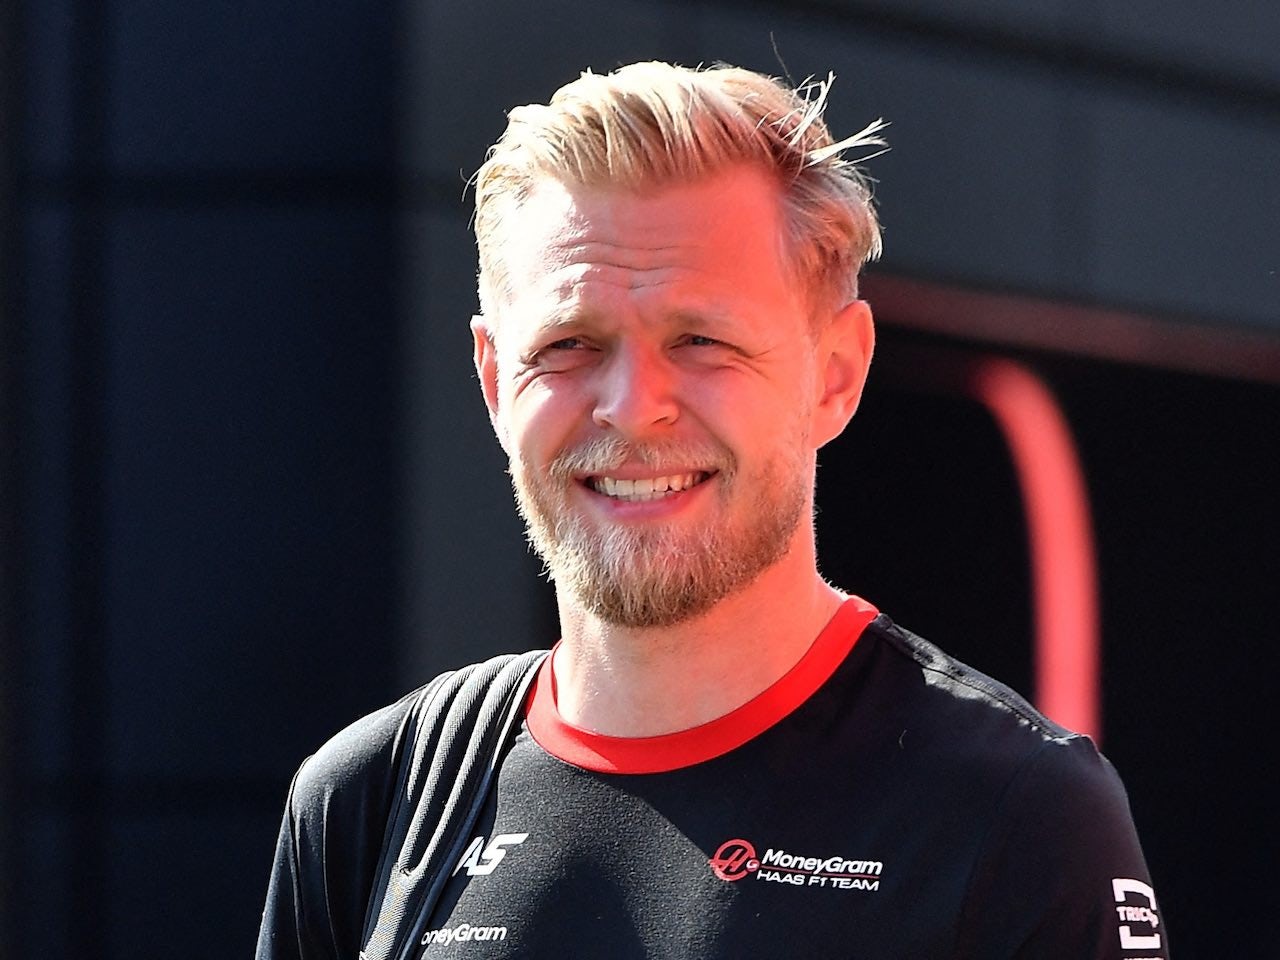 'Idiotic' to expect miracles with B-car - Magnussen